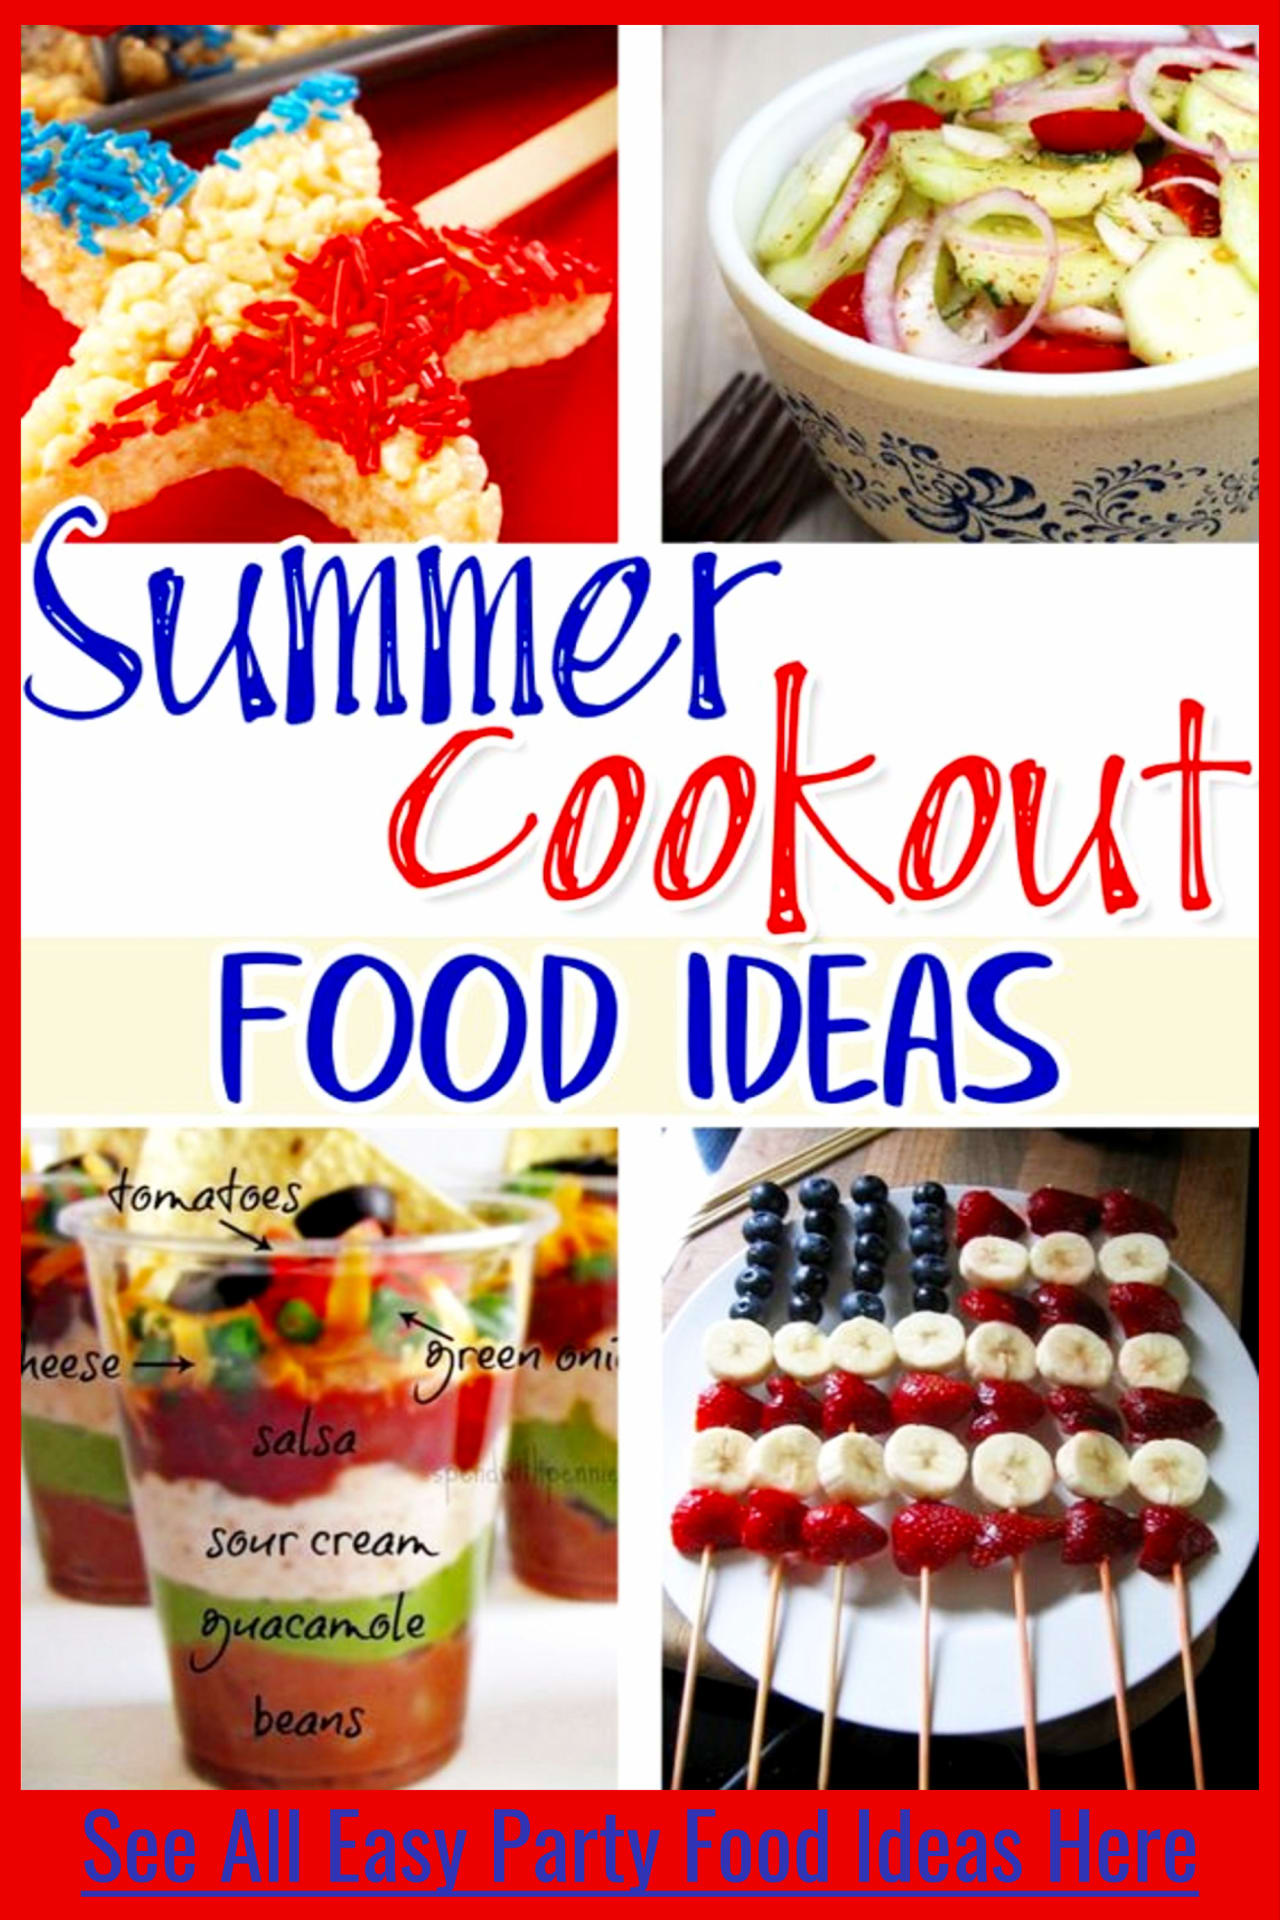 4th of July party food ideas for a crowd - easy backyard cookout food ideas for a 4th of July party or any outdoor summer party